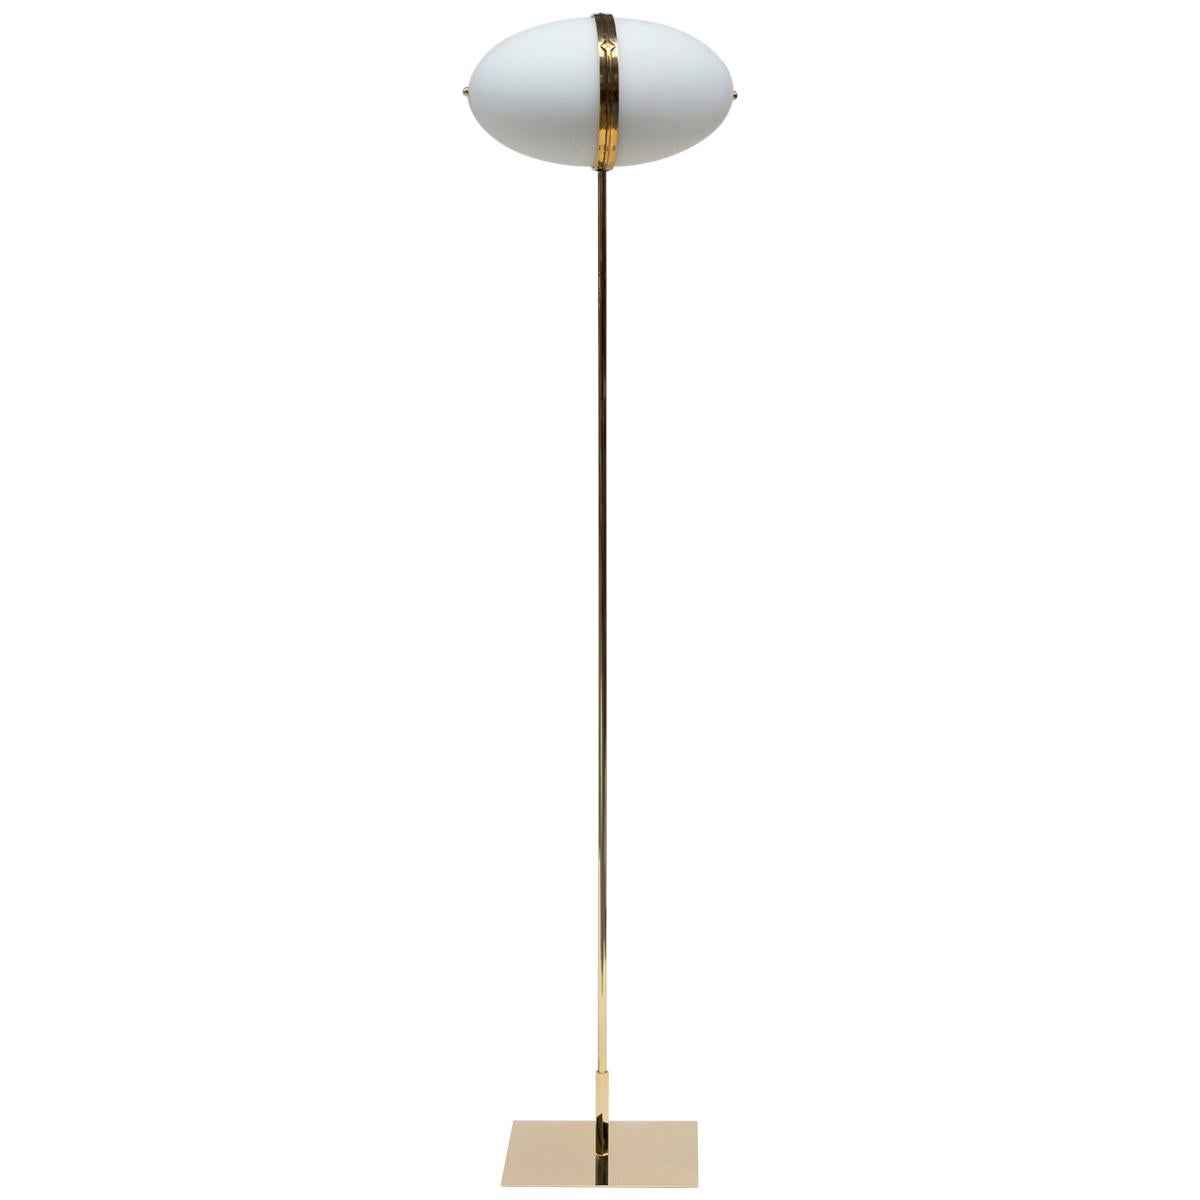 21st Century Art Deco Style Glass and Brass Gloss 'Dolly' MW32 Floor Lamp 